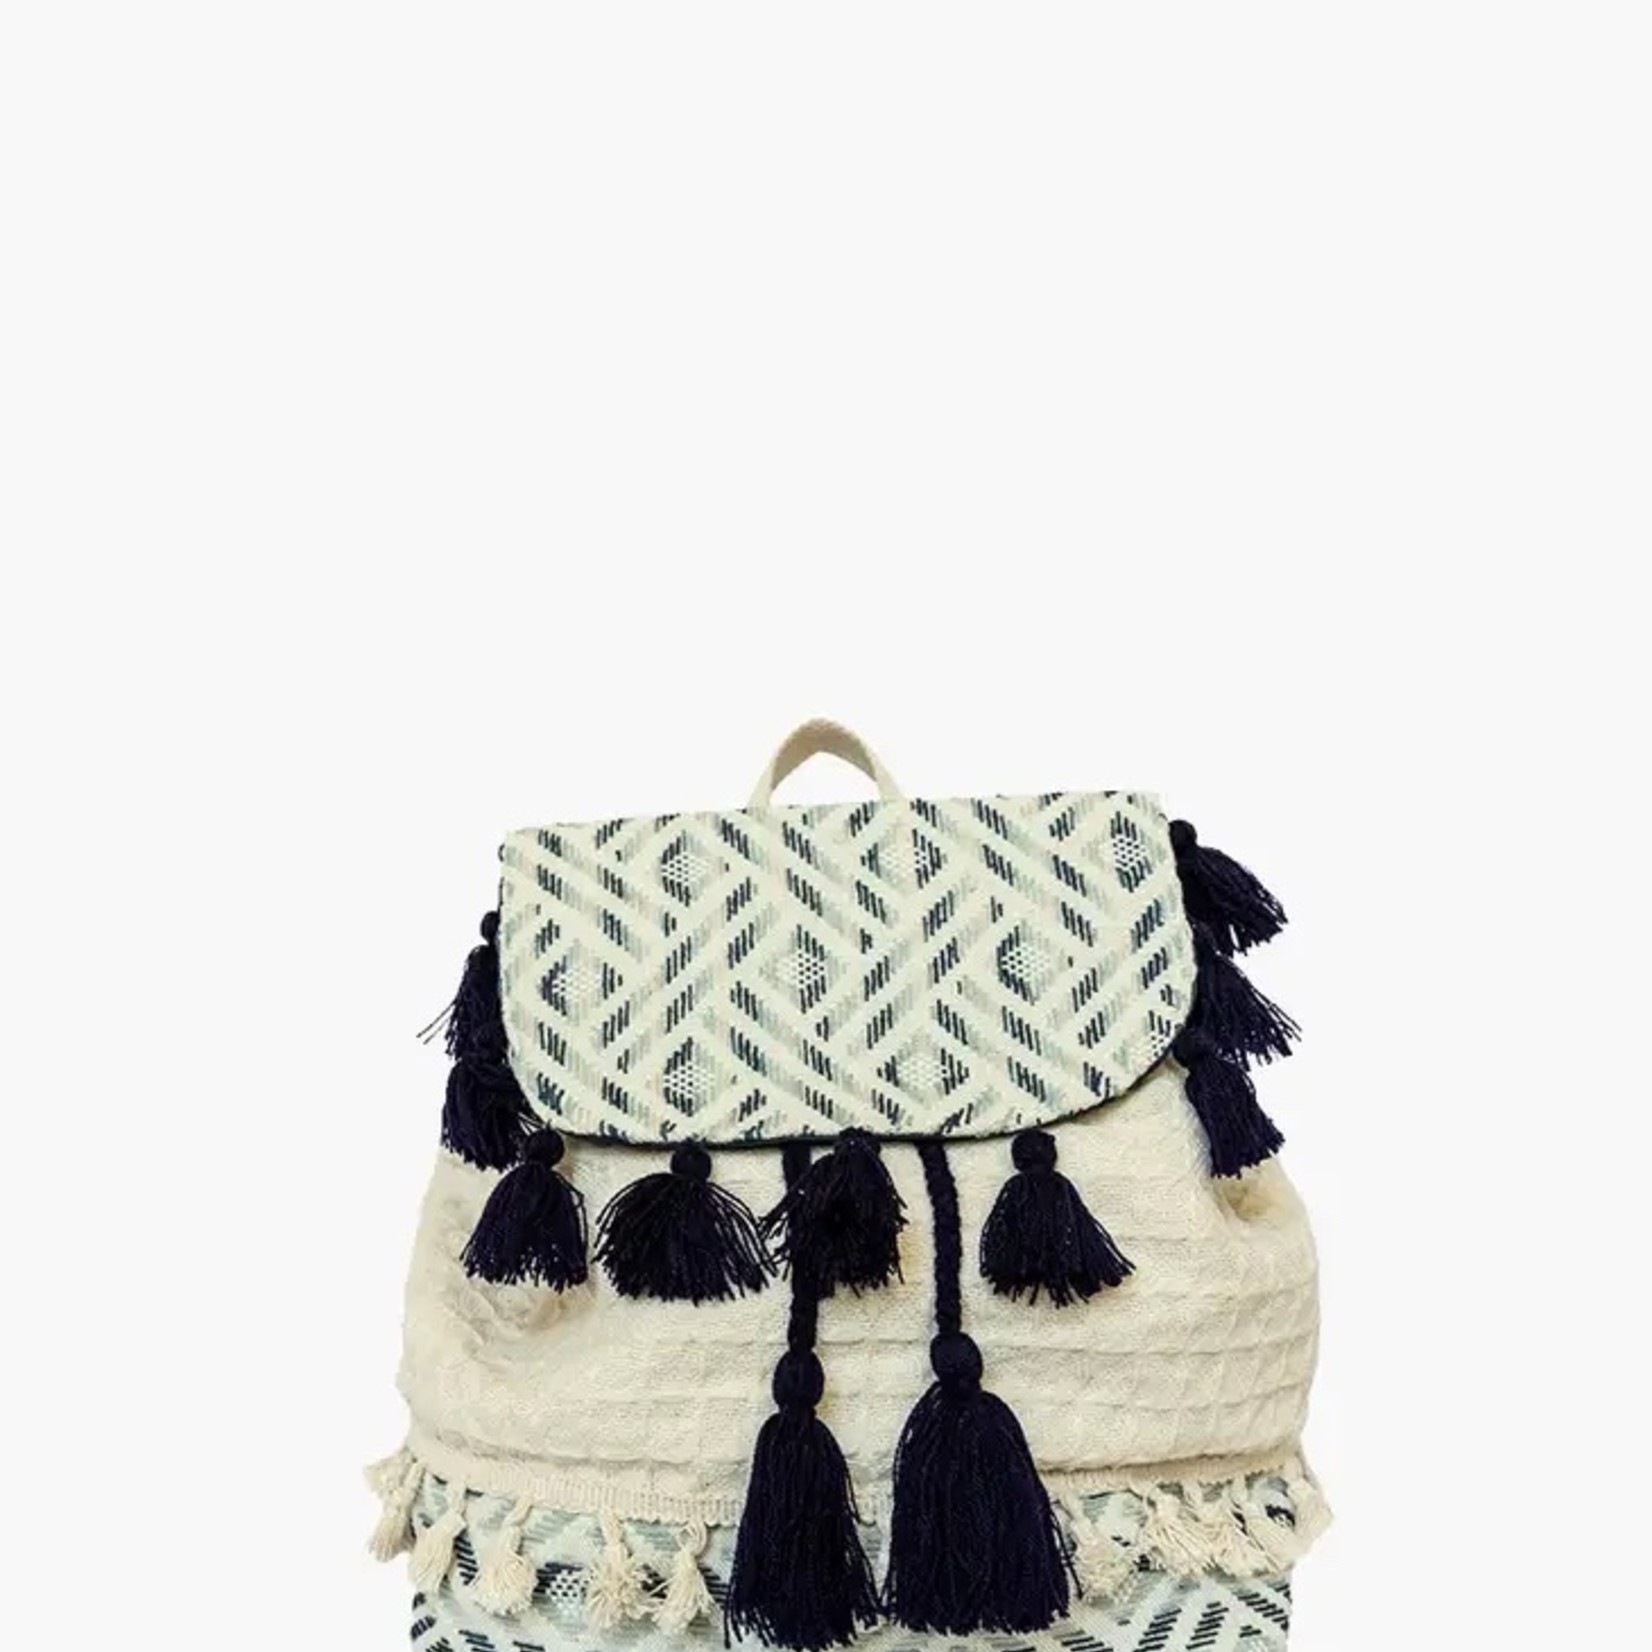 jen and co Aztec Backpack with Tassels